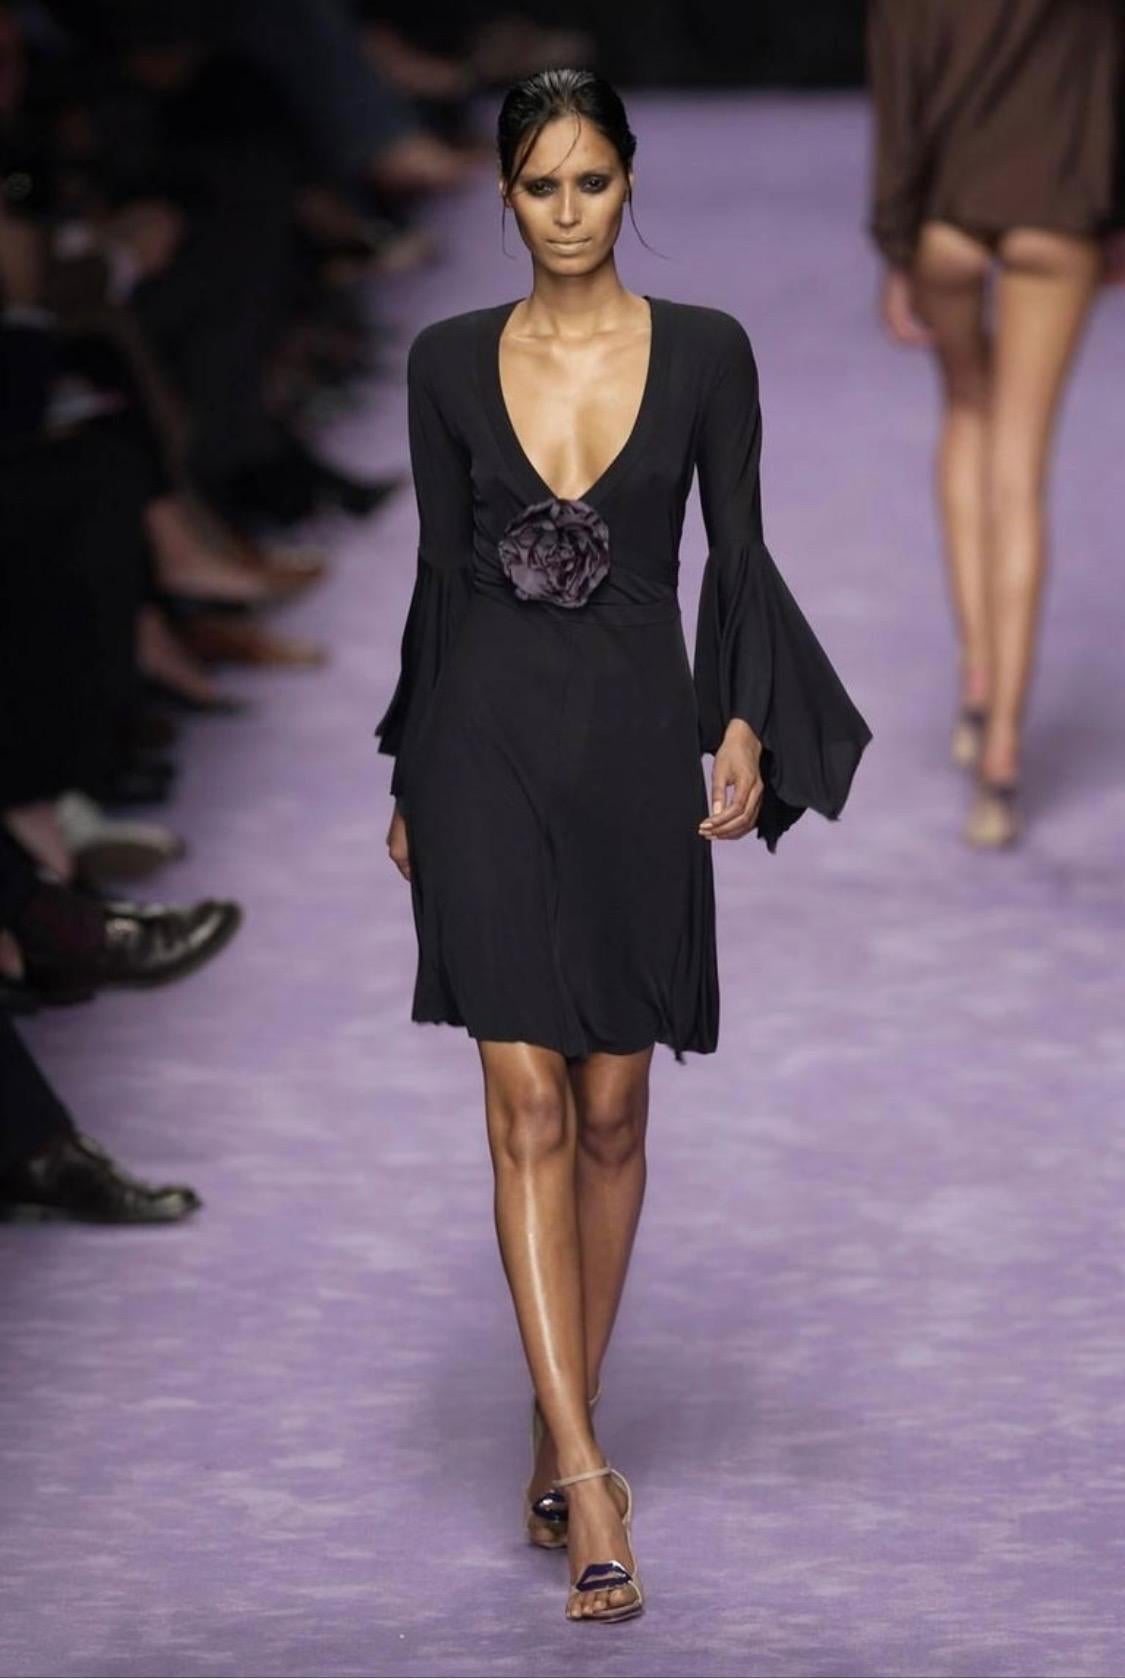 Presenting a flirty Yves Saint Laurent Rive Gauche fit and flare dress designed by Tom Ford for the Spring/Summer 2003 collection, debuting on the runway at look number 28 on Ujjwala Raut. This dress also appeared in the January 2003 issue of Vogue